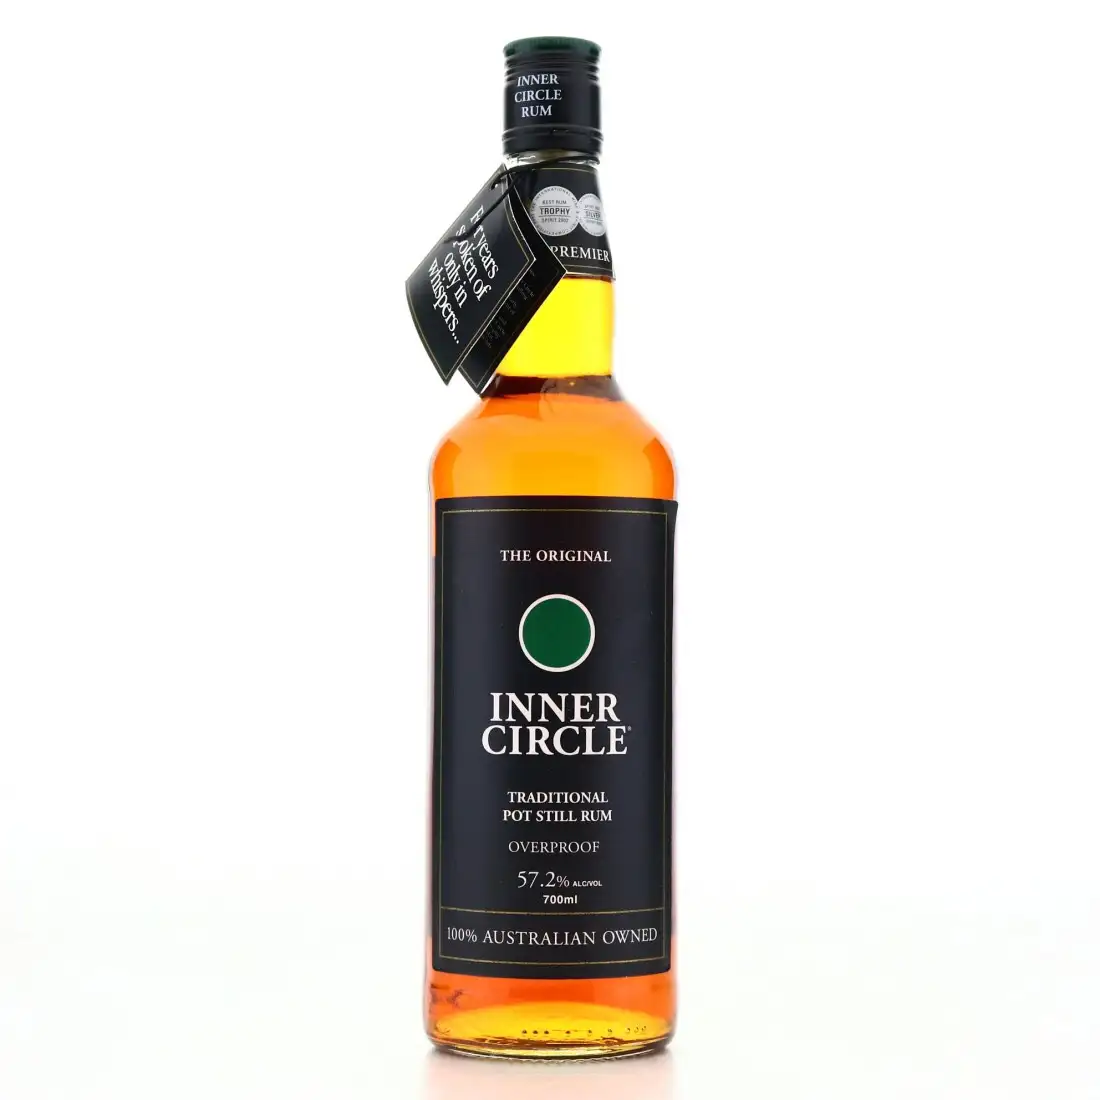 Image of the front of the bottle of the rum Inner Circle Overproof Traditional Pot Still Rum